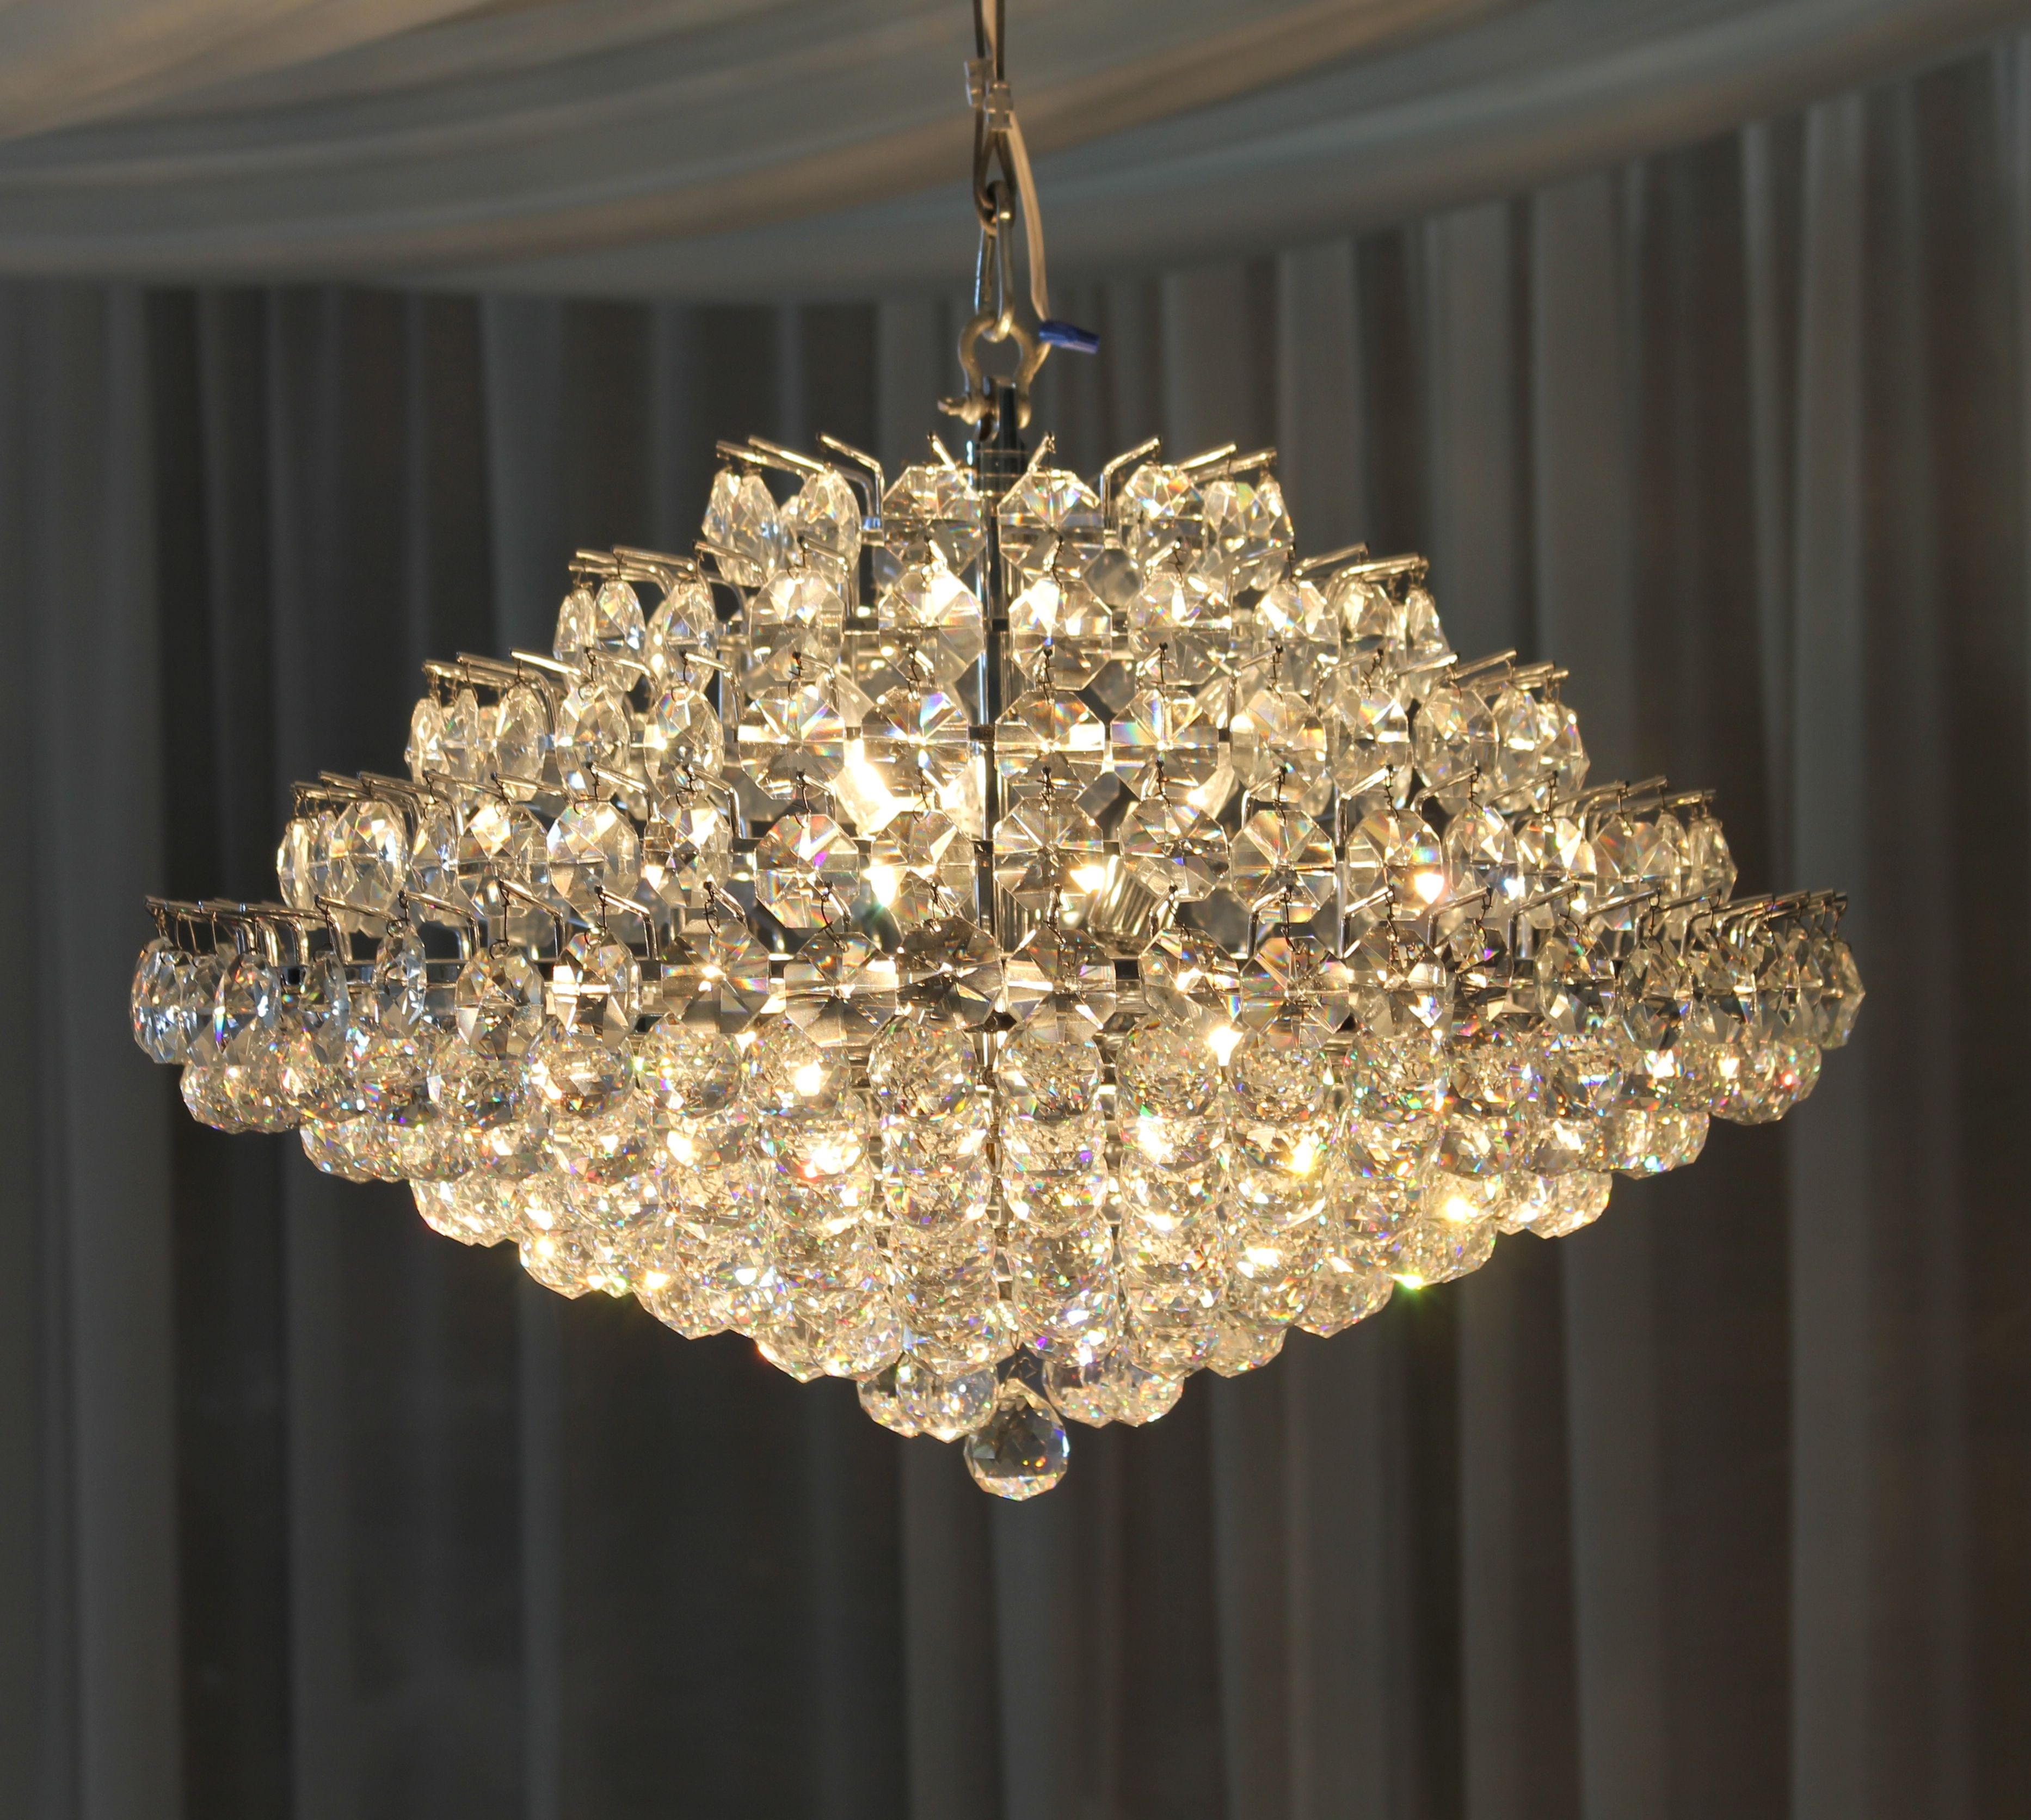 Chandelier Astounding White Crystal Chandelier White Crystal Inside White And Crystal Chandeliers (View 15 of 25)